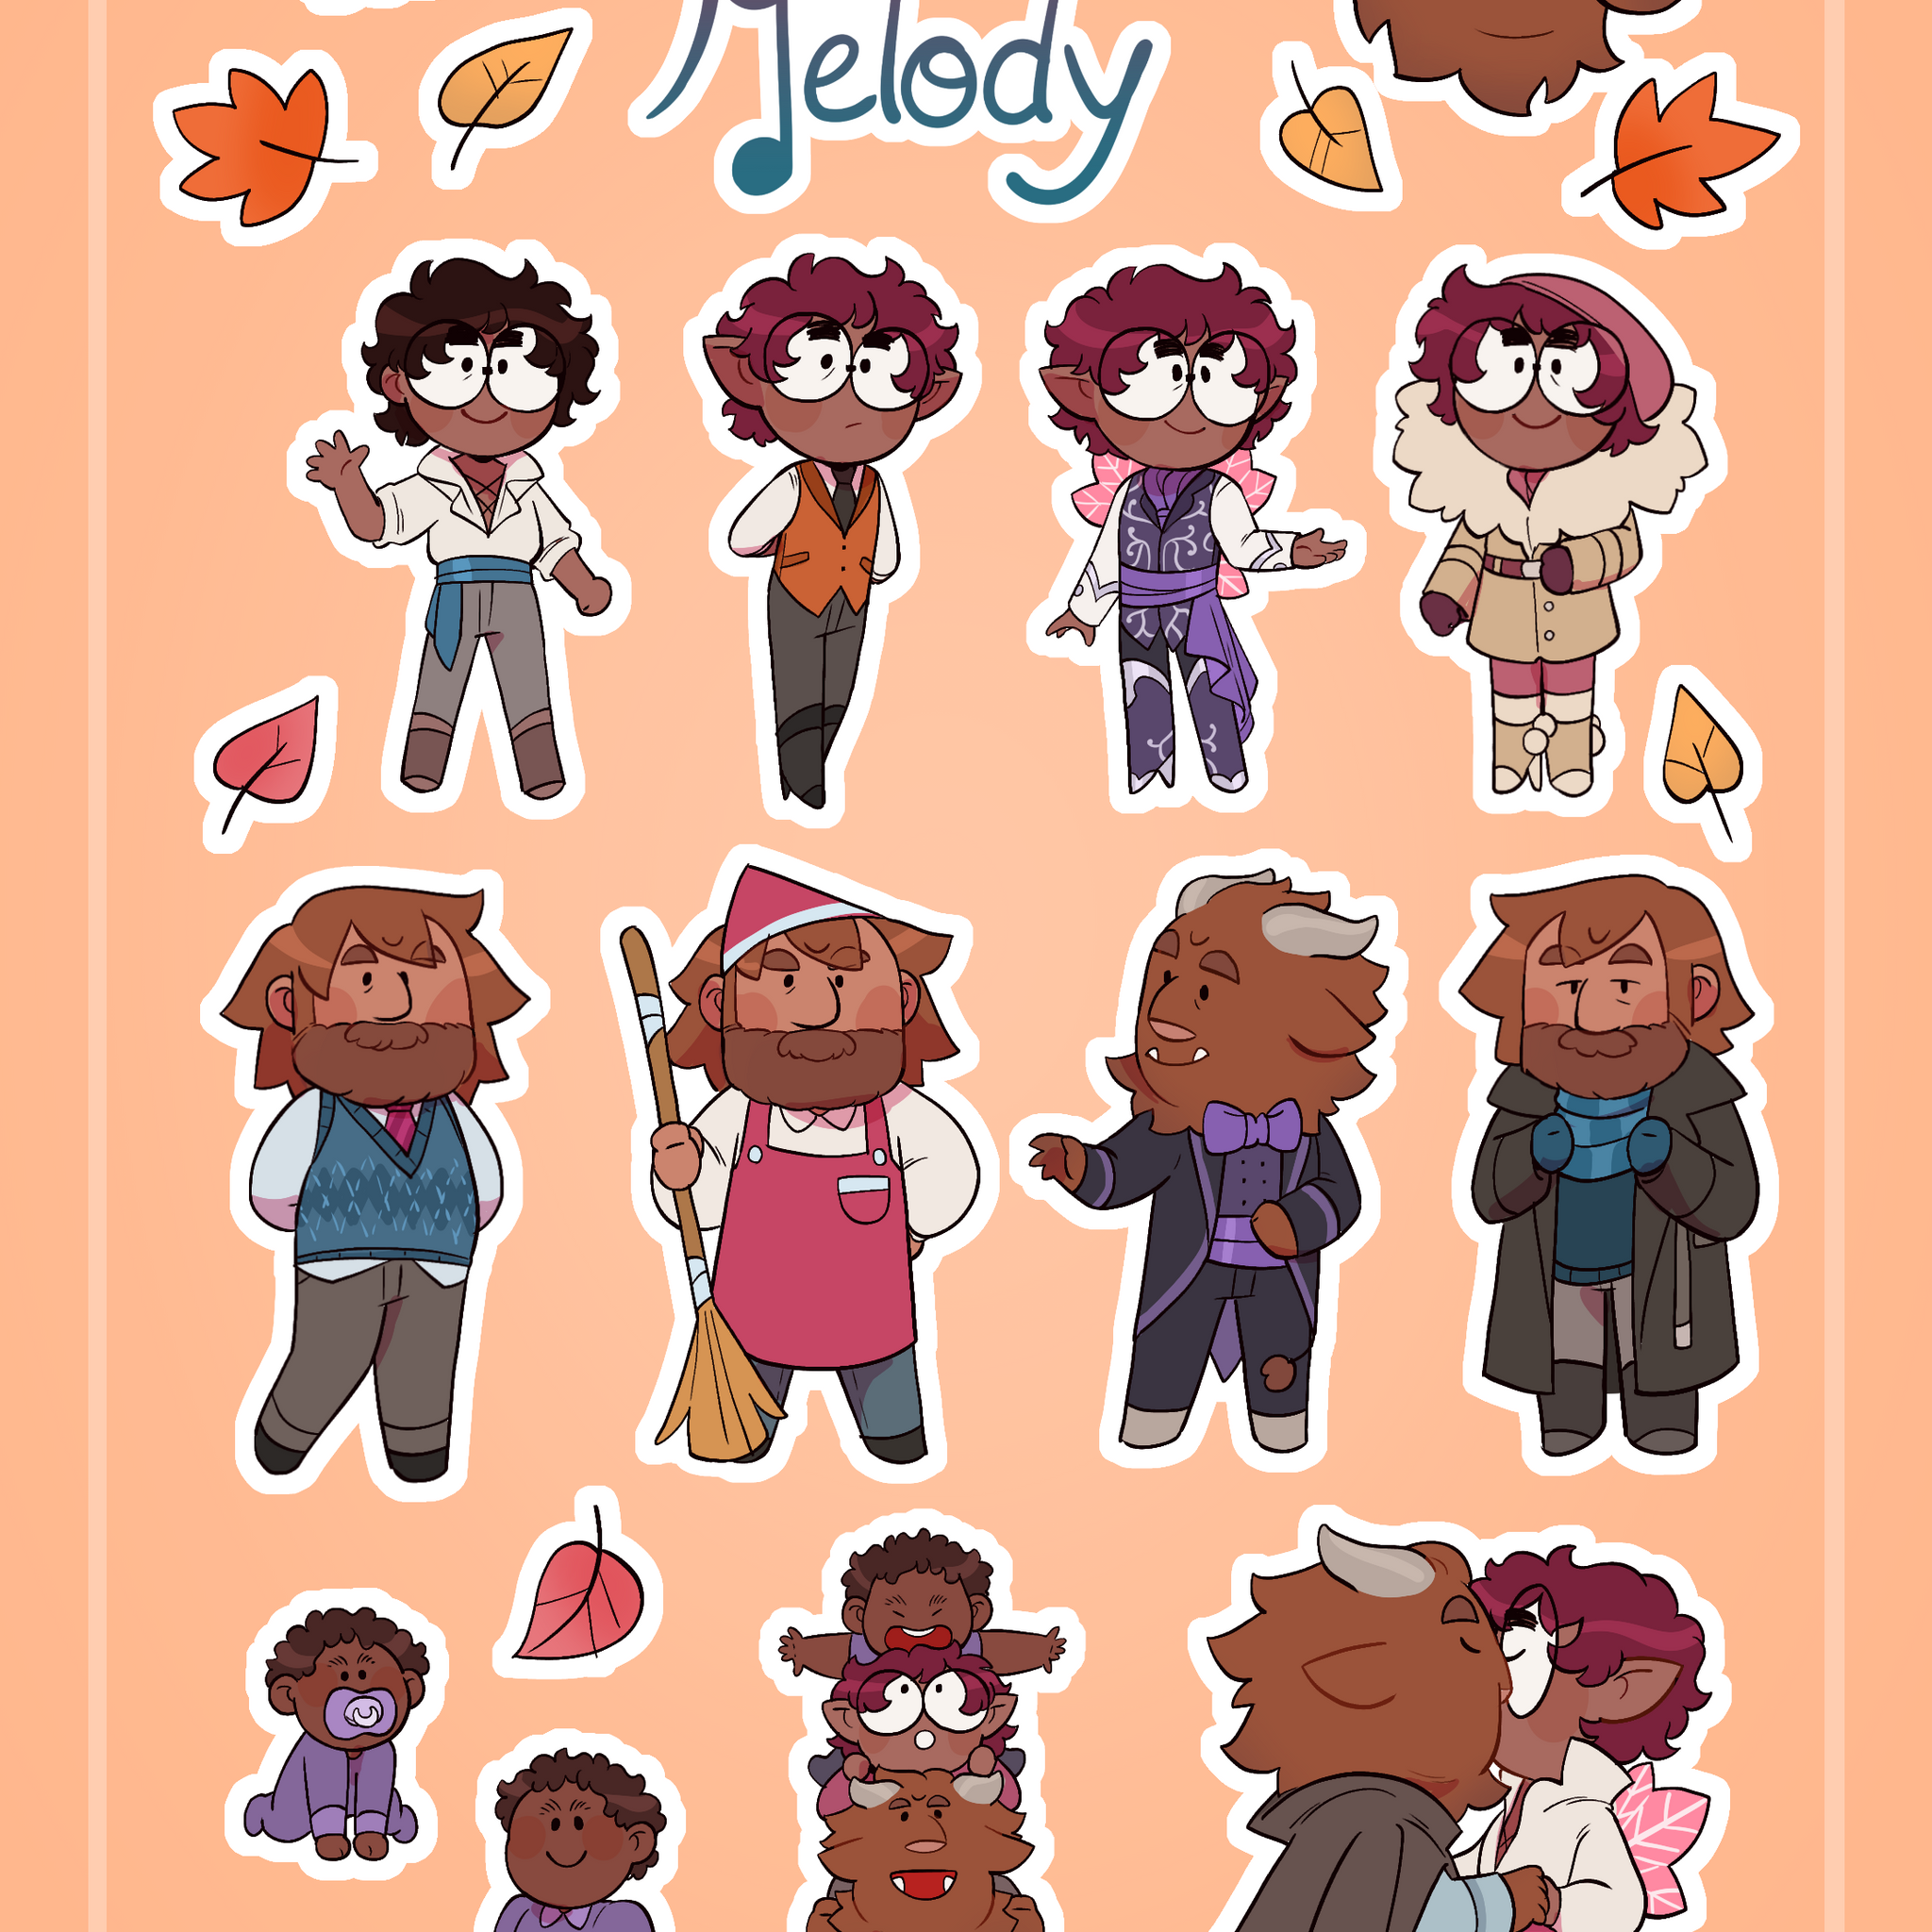 Life of Melody - Postcard and Sticker Set from Peritale - Webcomic Merchandise 